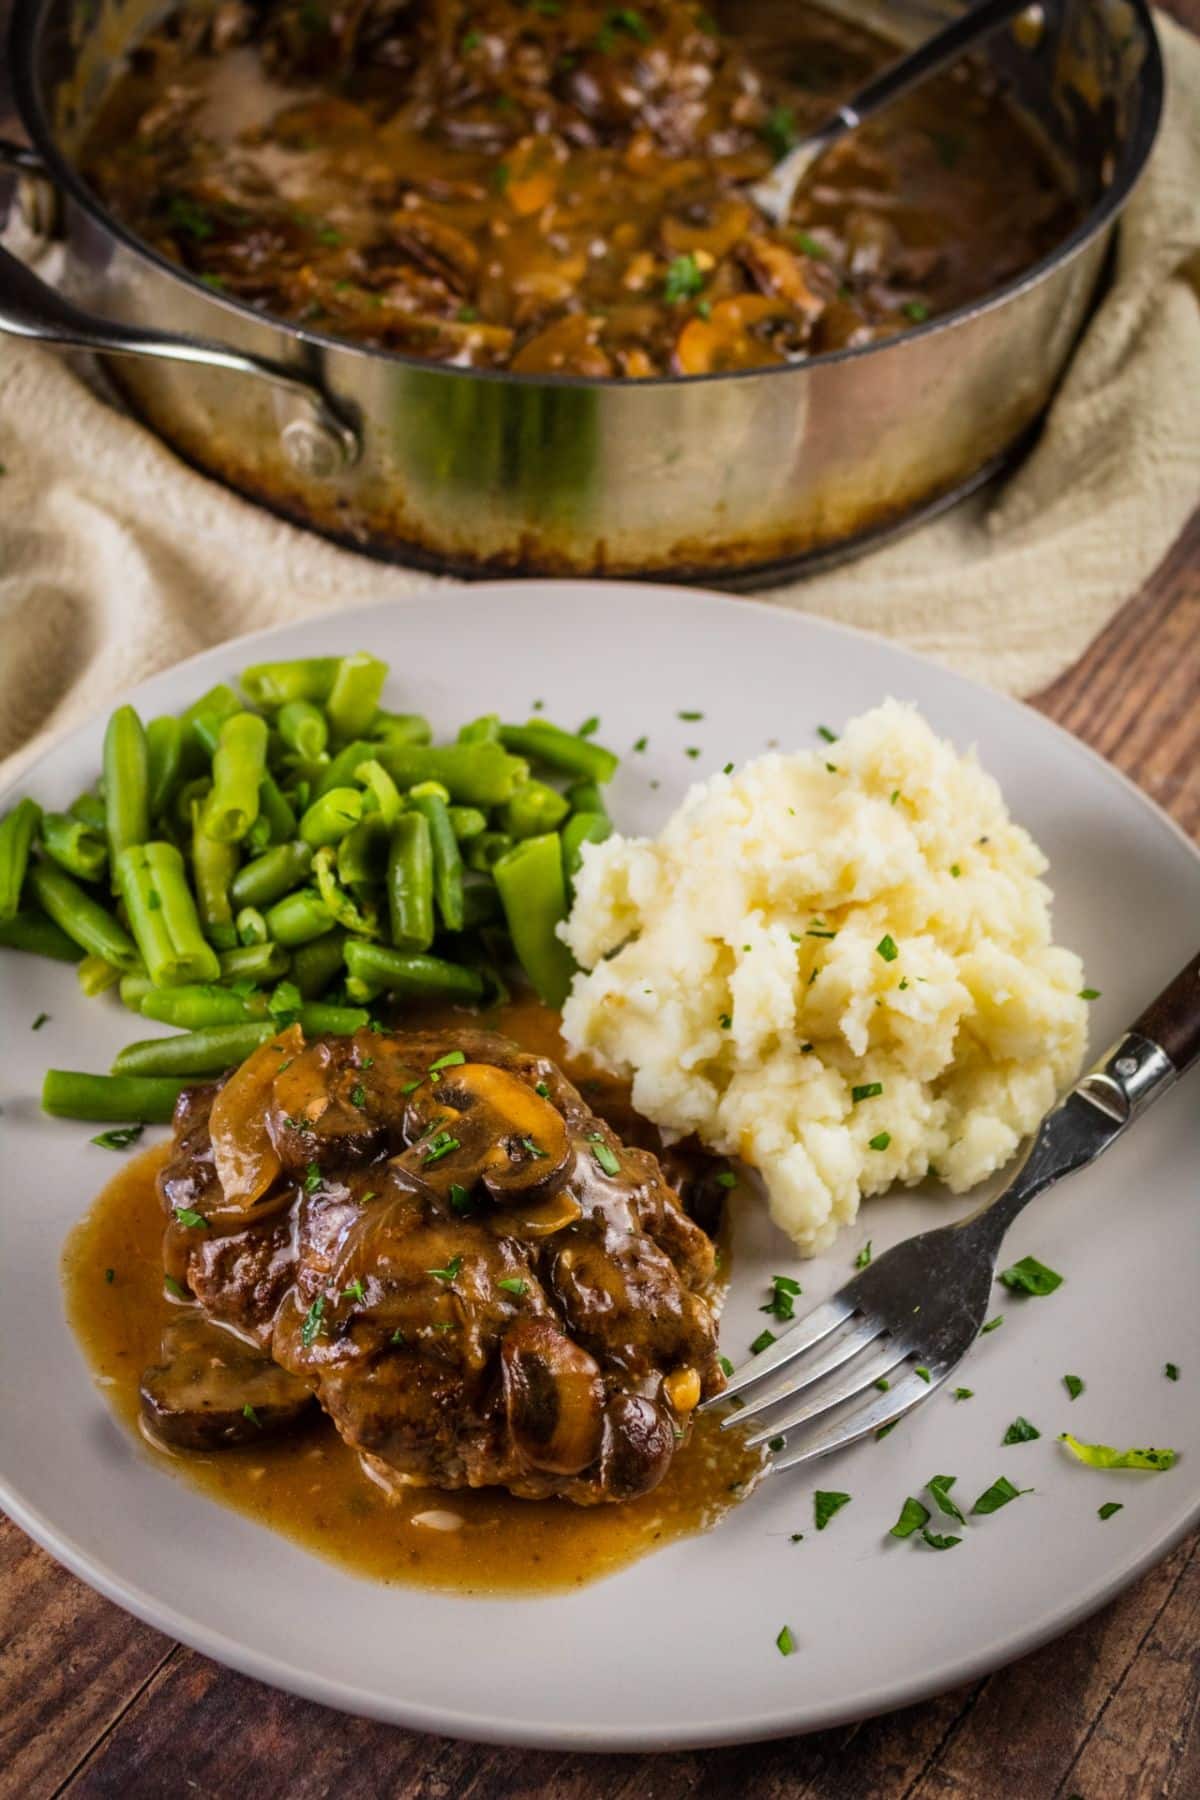 Juicy salisbury steak with mashed potatoes, beans on a white plate with a fork.